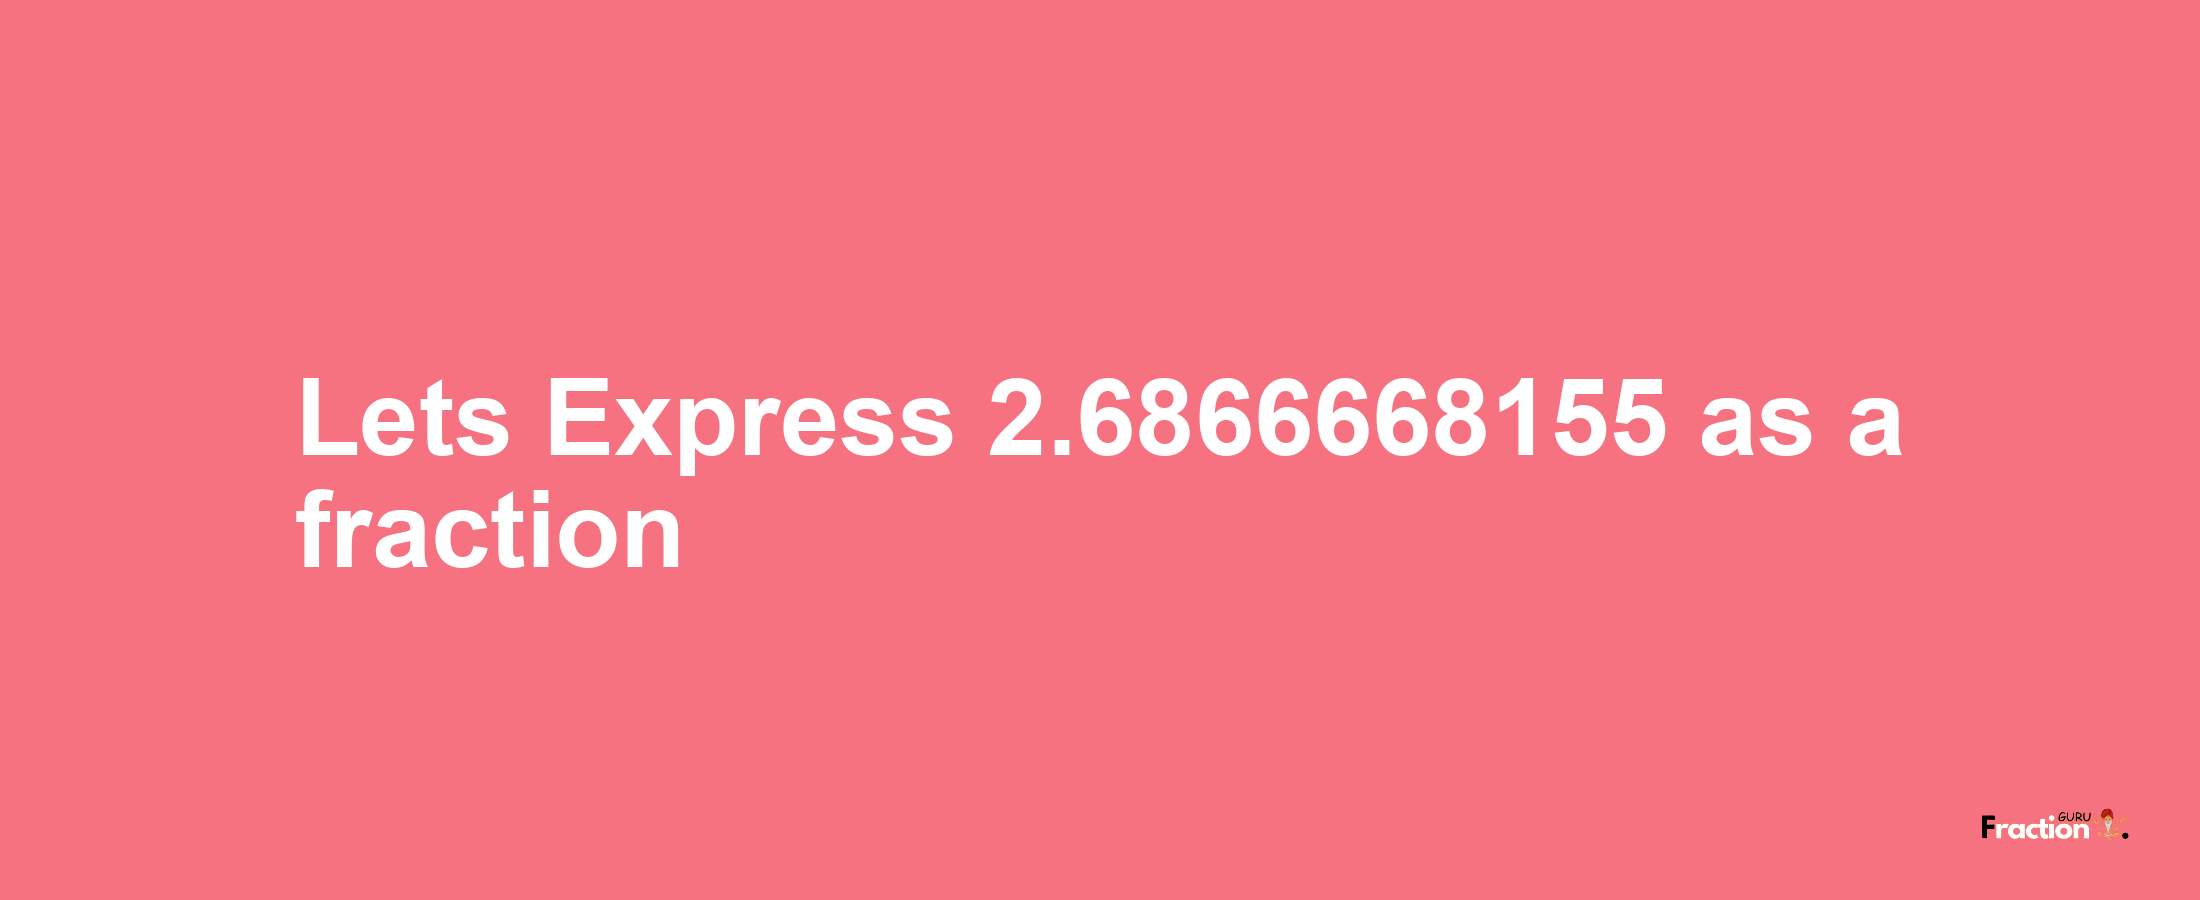 Lets Express 2.6866668155 as afraction